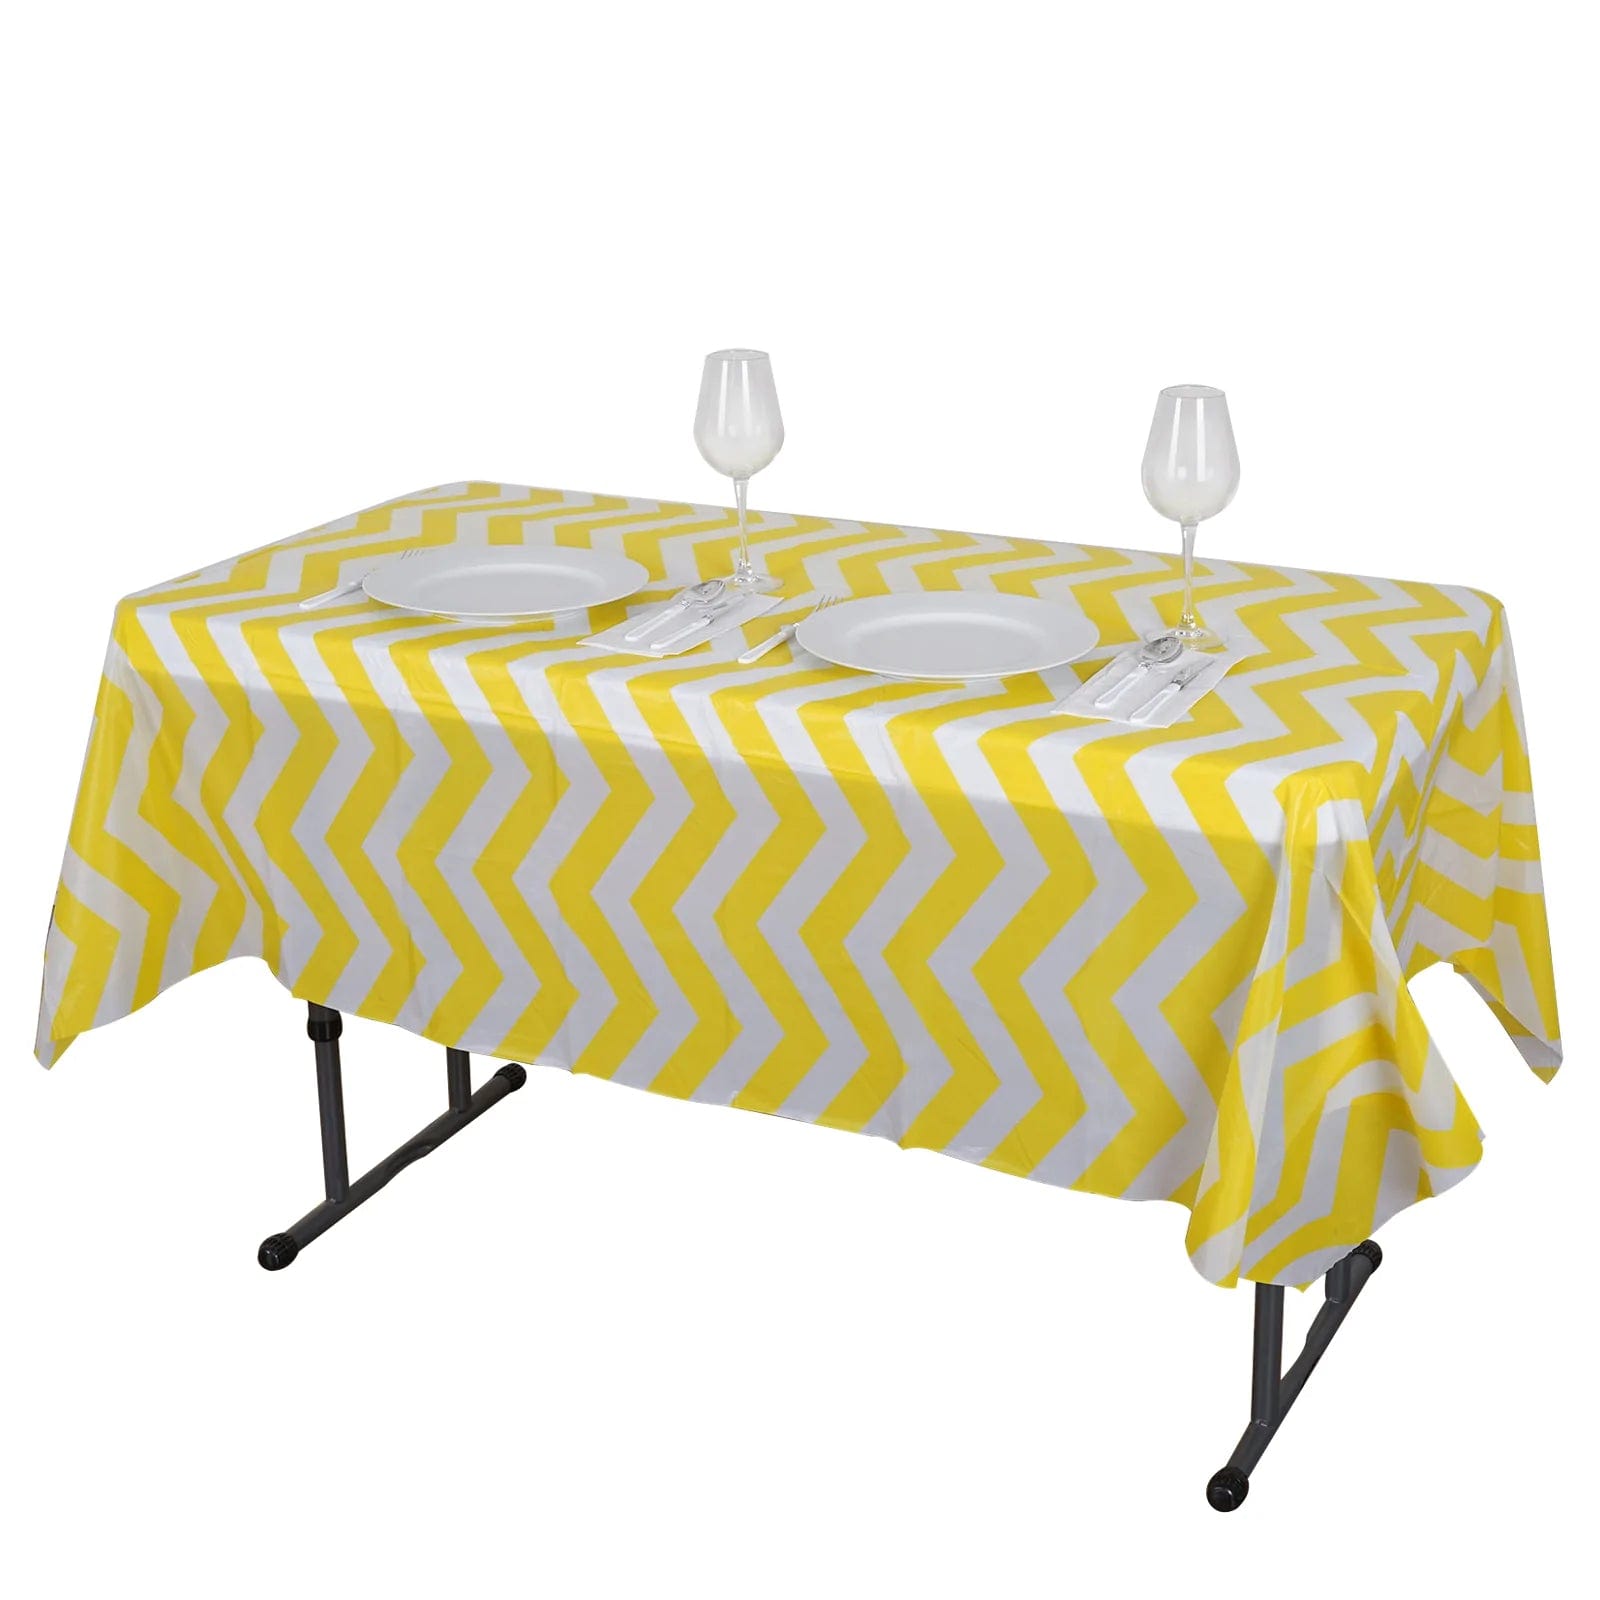 54x72 inch Chevron Disposable Plastic Table Cover Rectangular Tablecloth